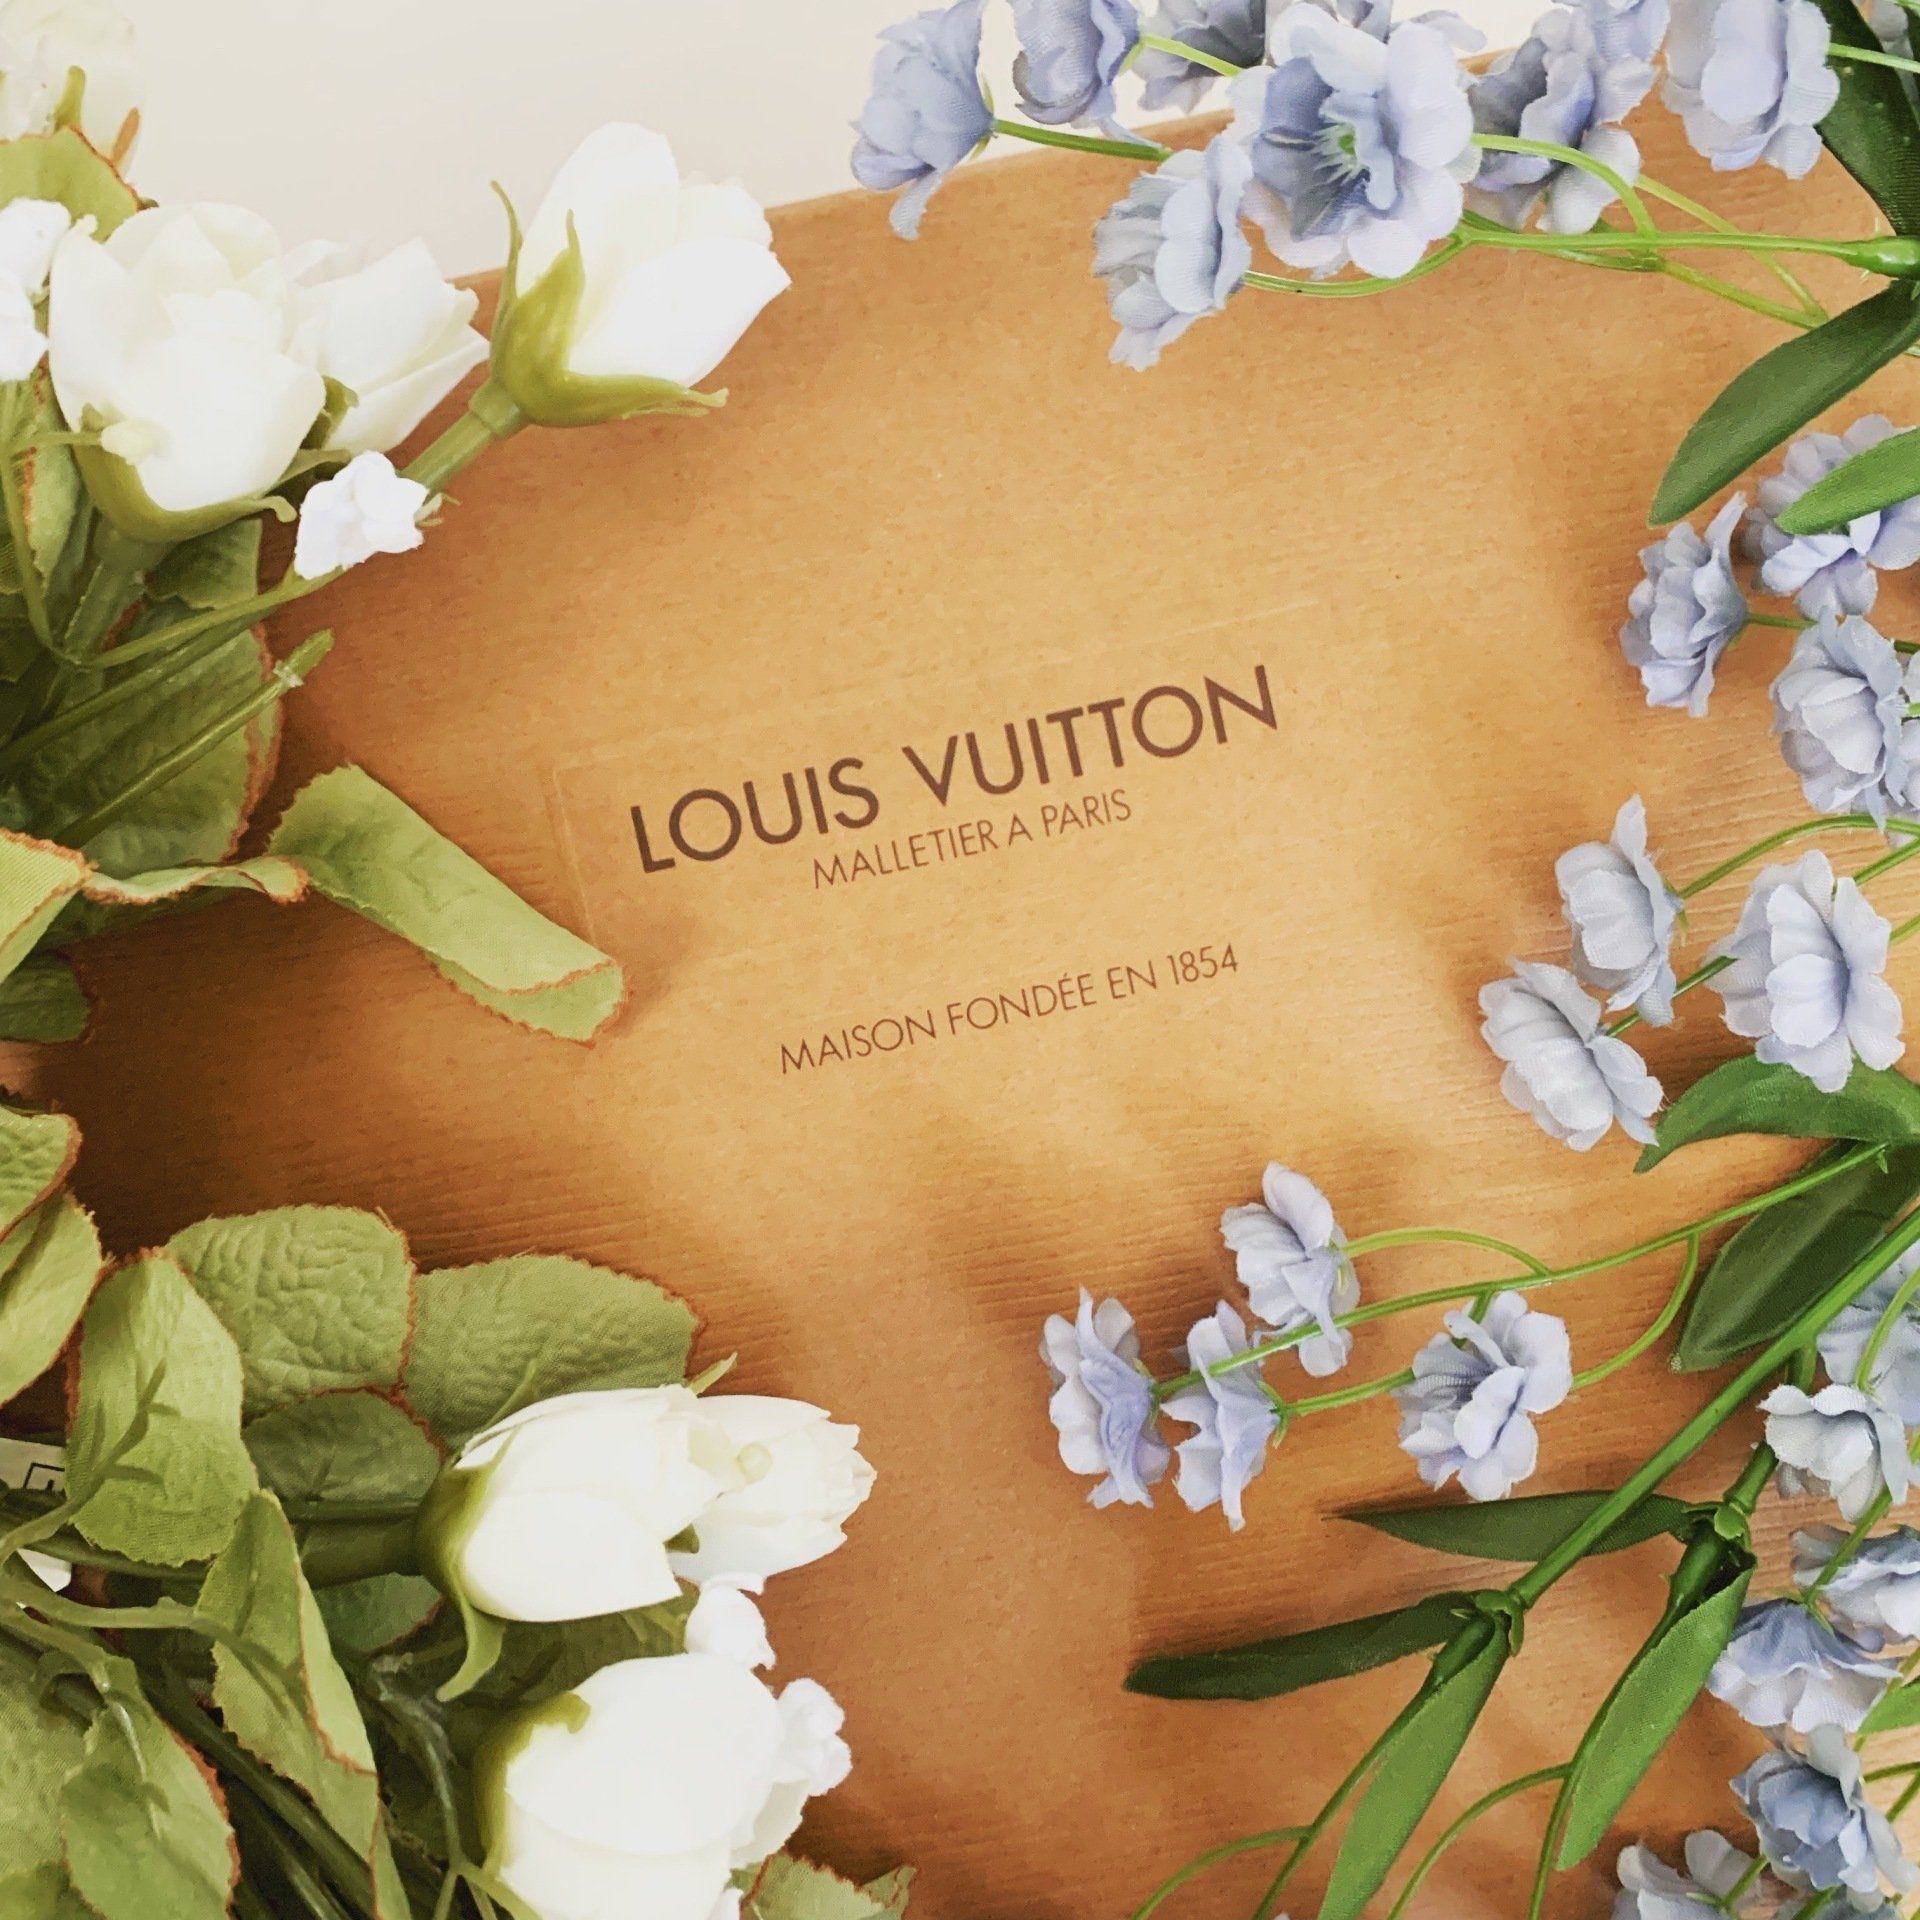 Image of Louis Vuitton package.